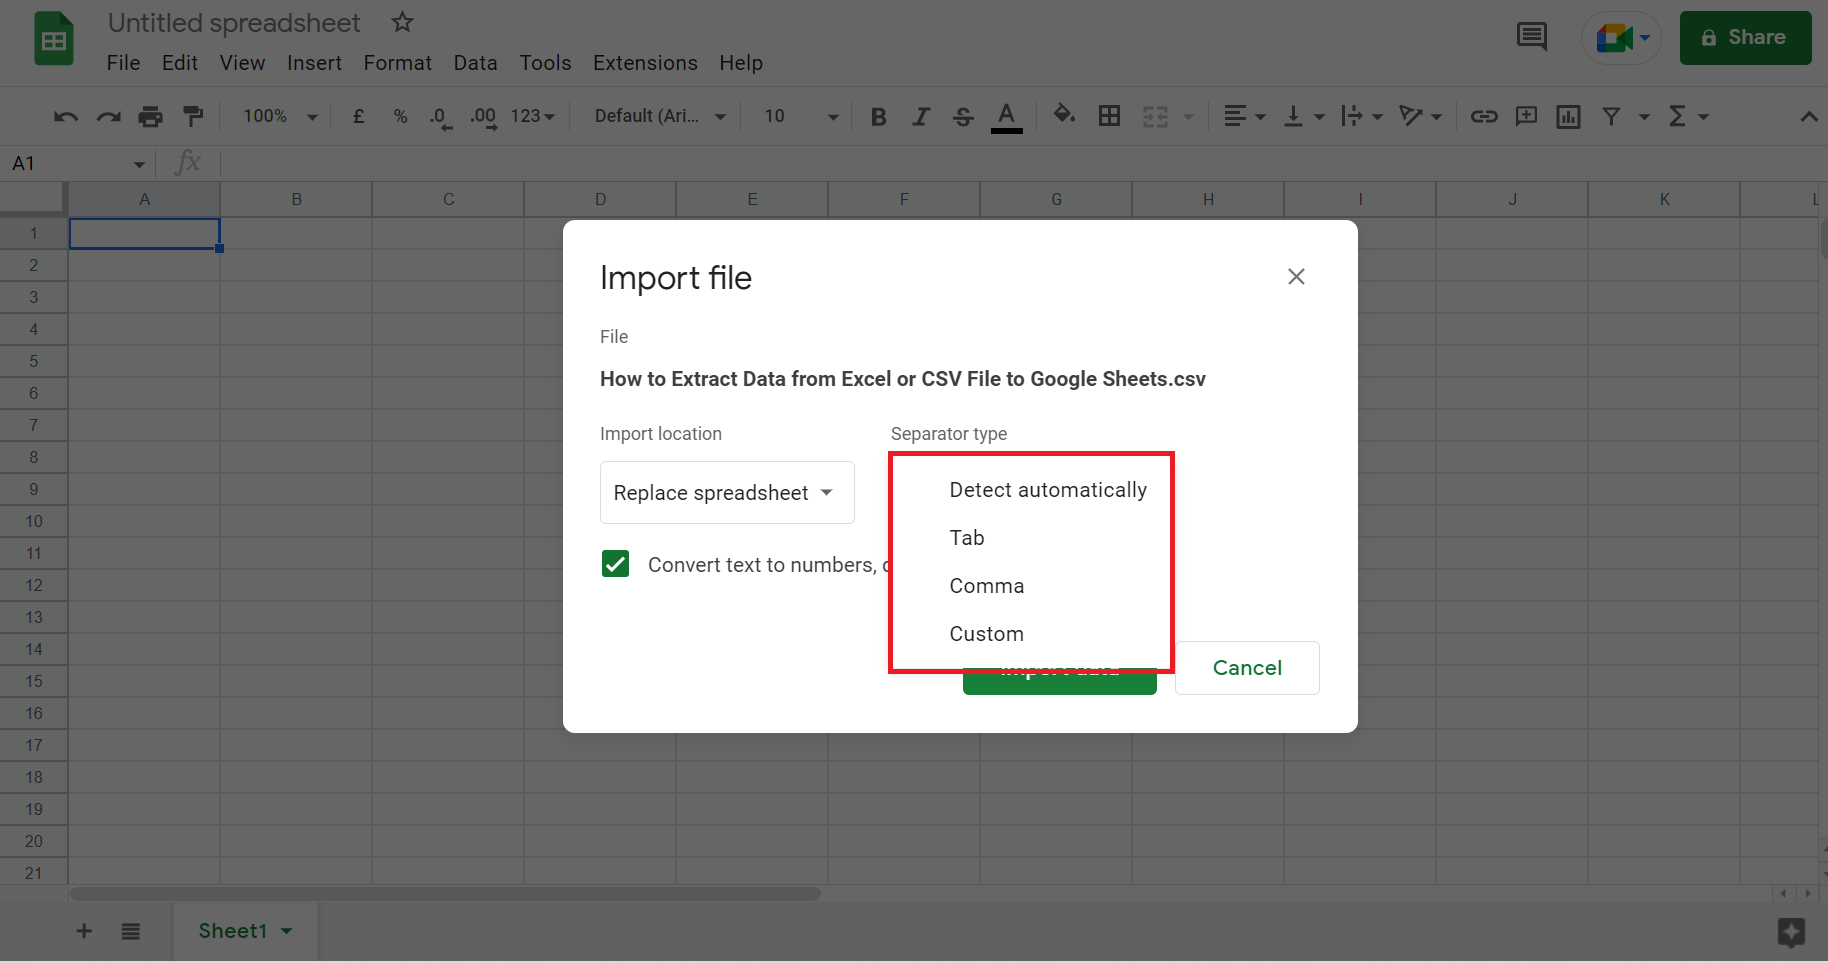 Extract Data from Excel or CSV file to Google Sheets